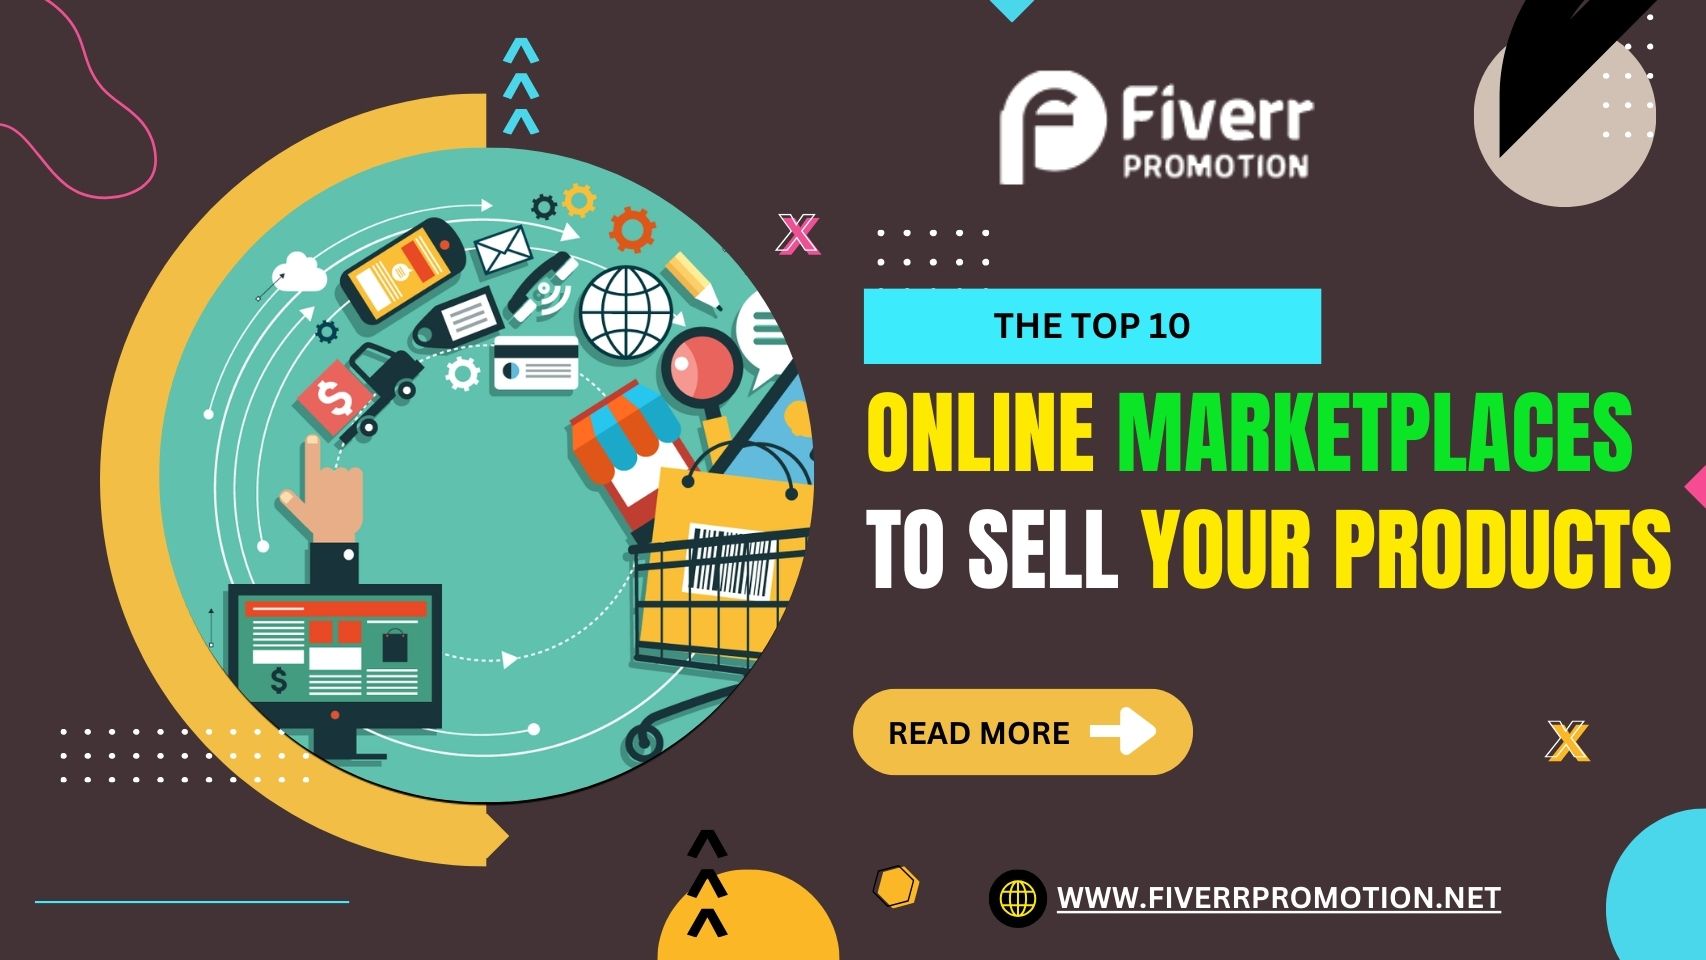 The Top 10 Online Marketplaces to Sell Your Products